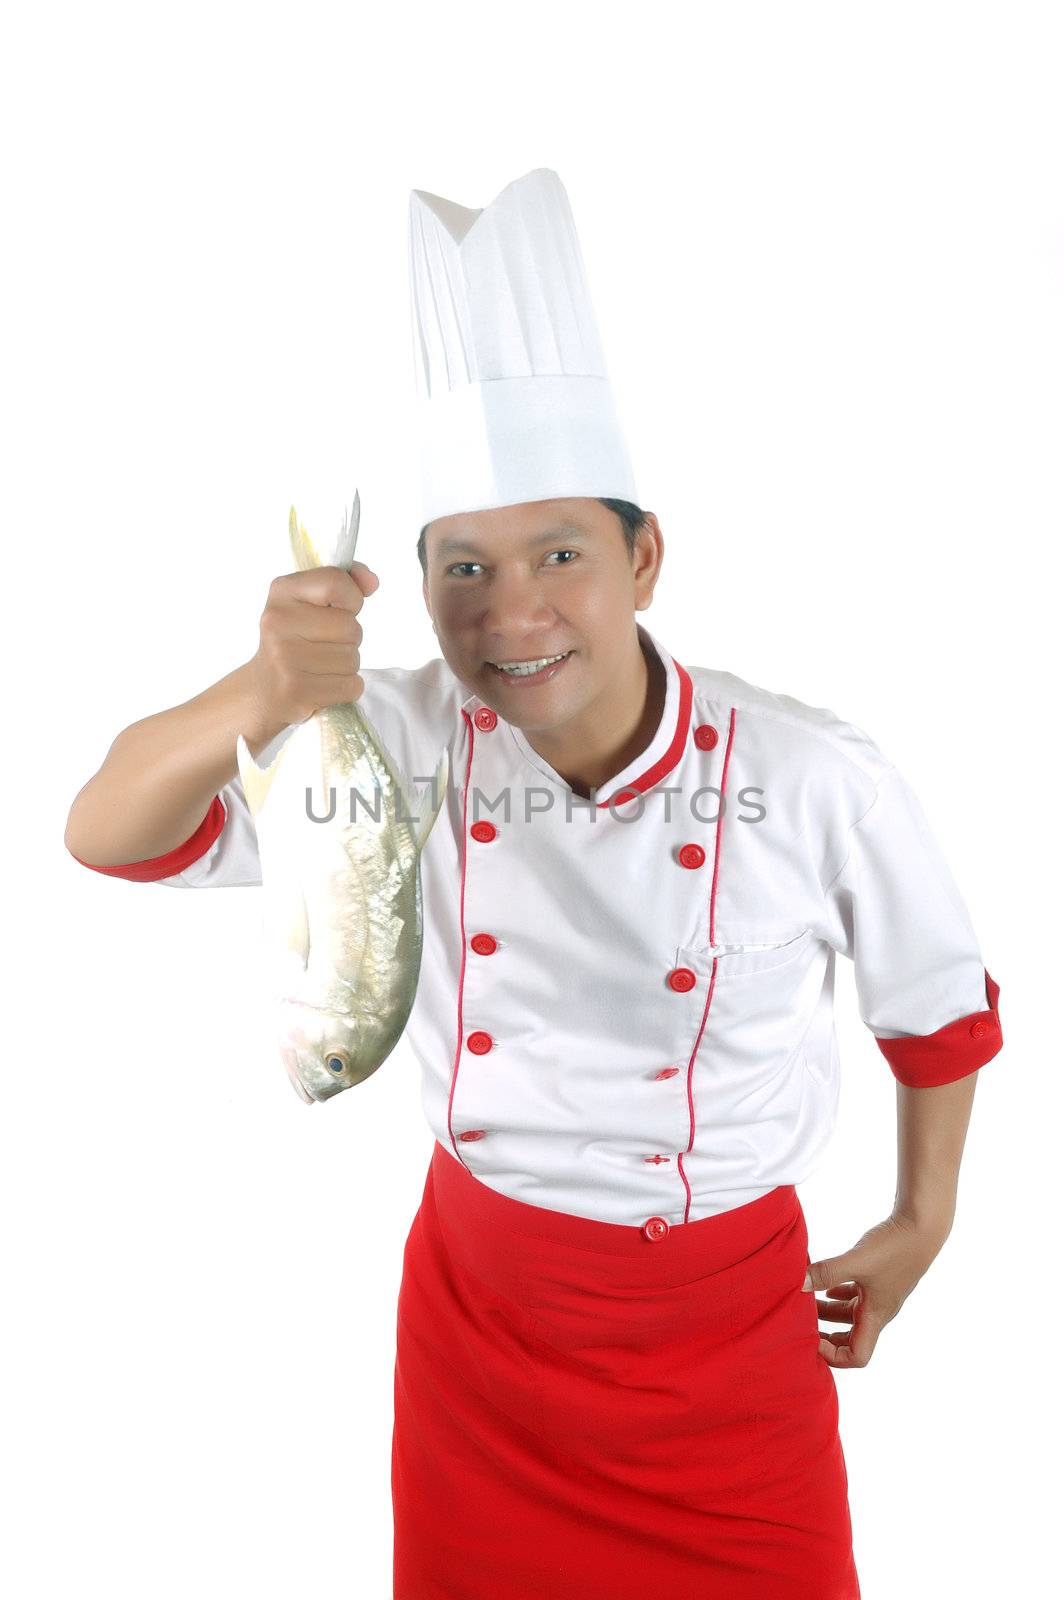 chef holding a big raw fish isolated on white background